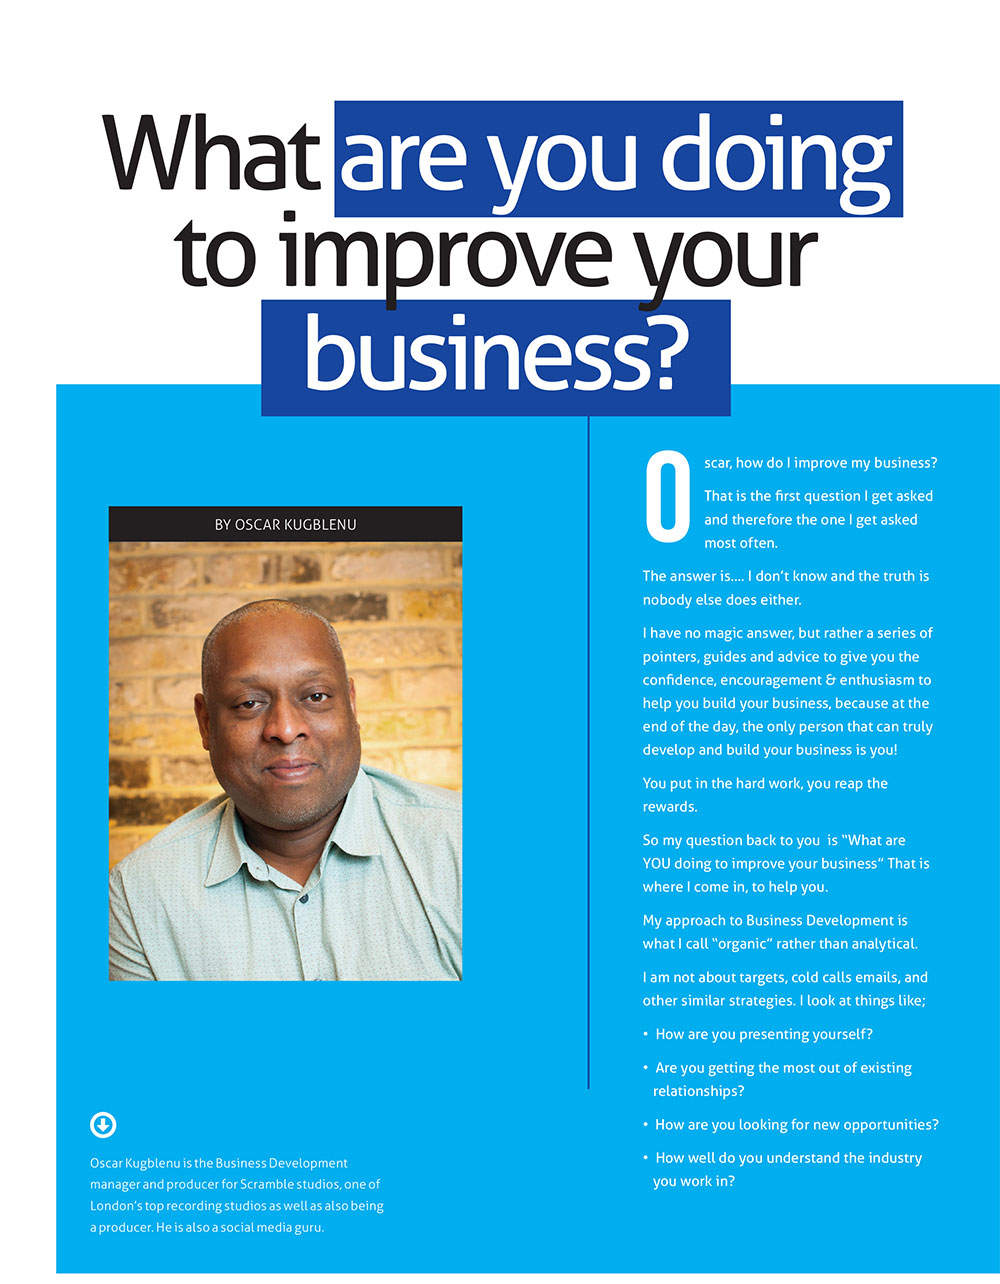 What are you doing to improve your business by Oscar Kugblenu